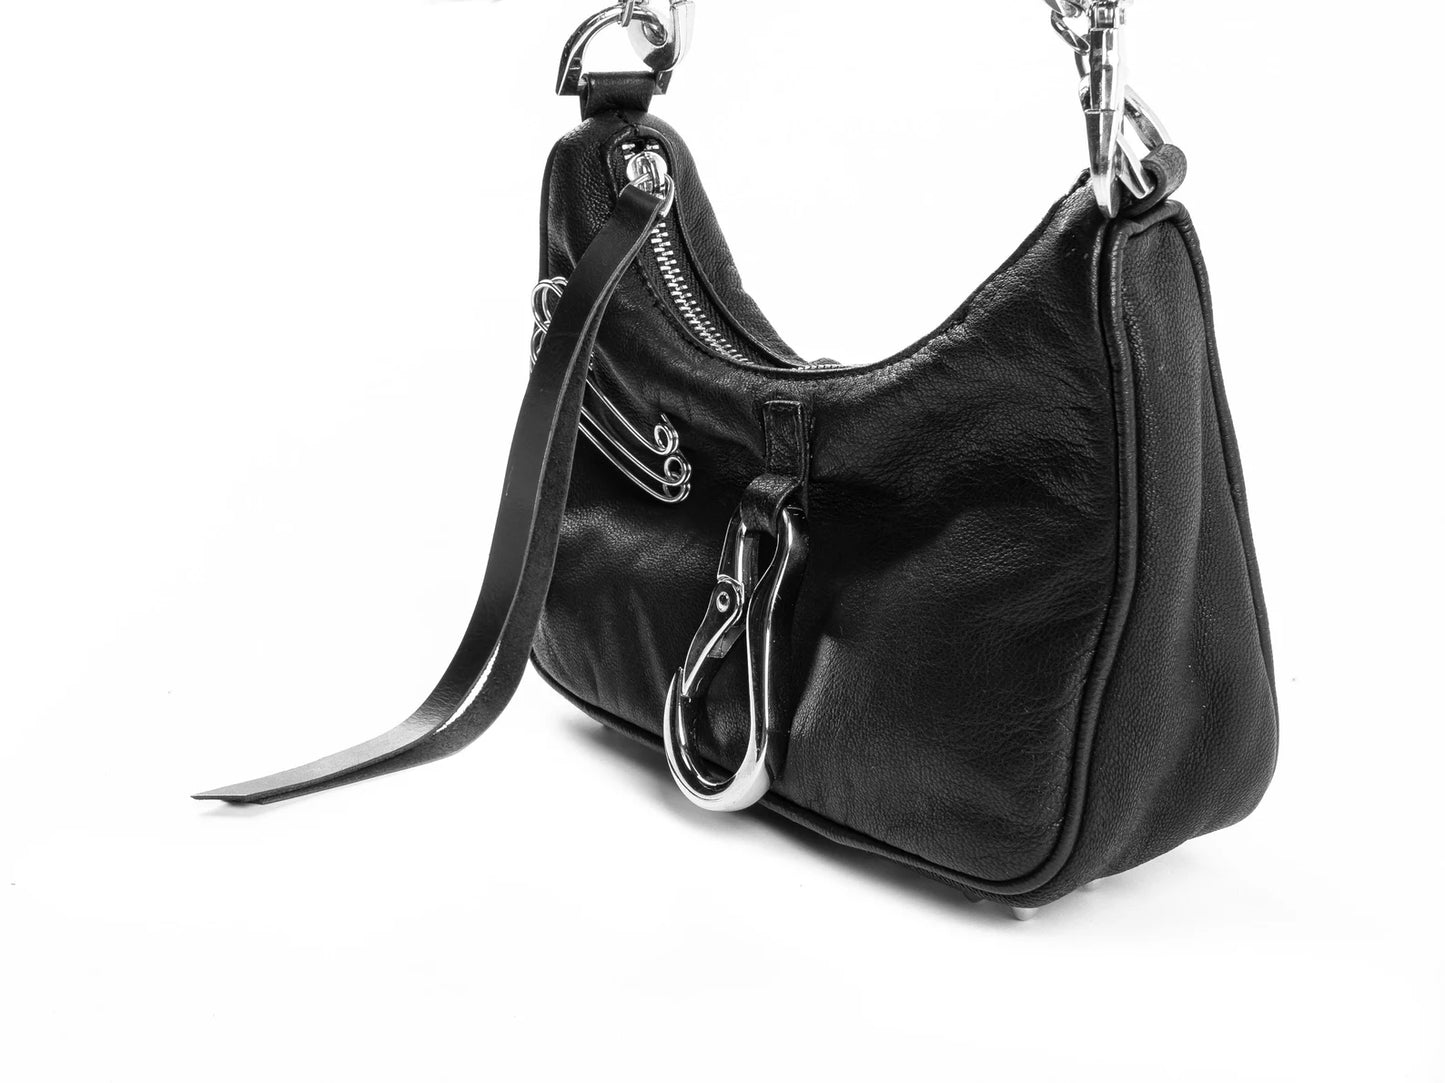 Chain of Command Convertible Bag